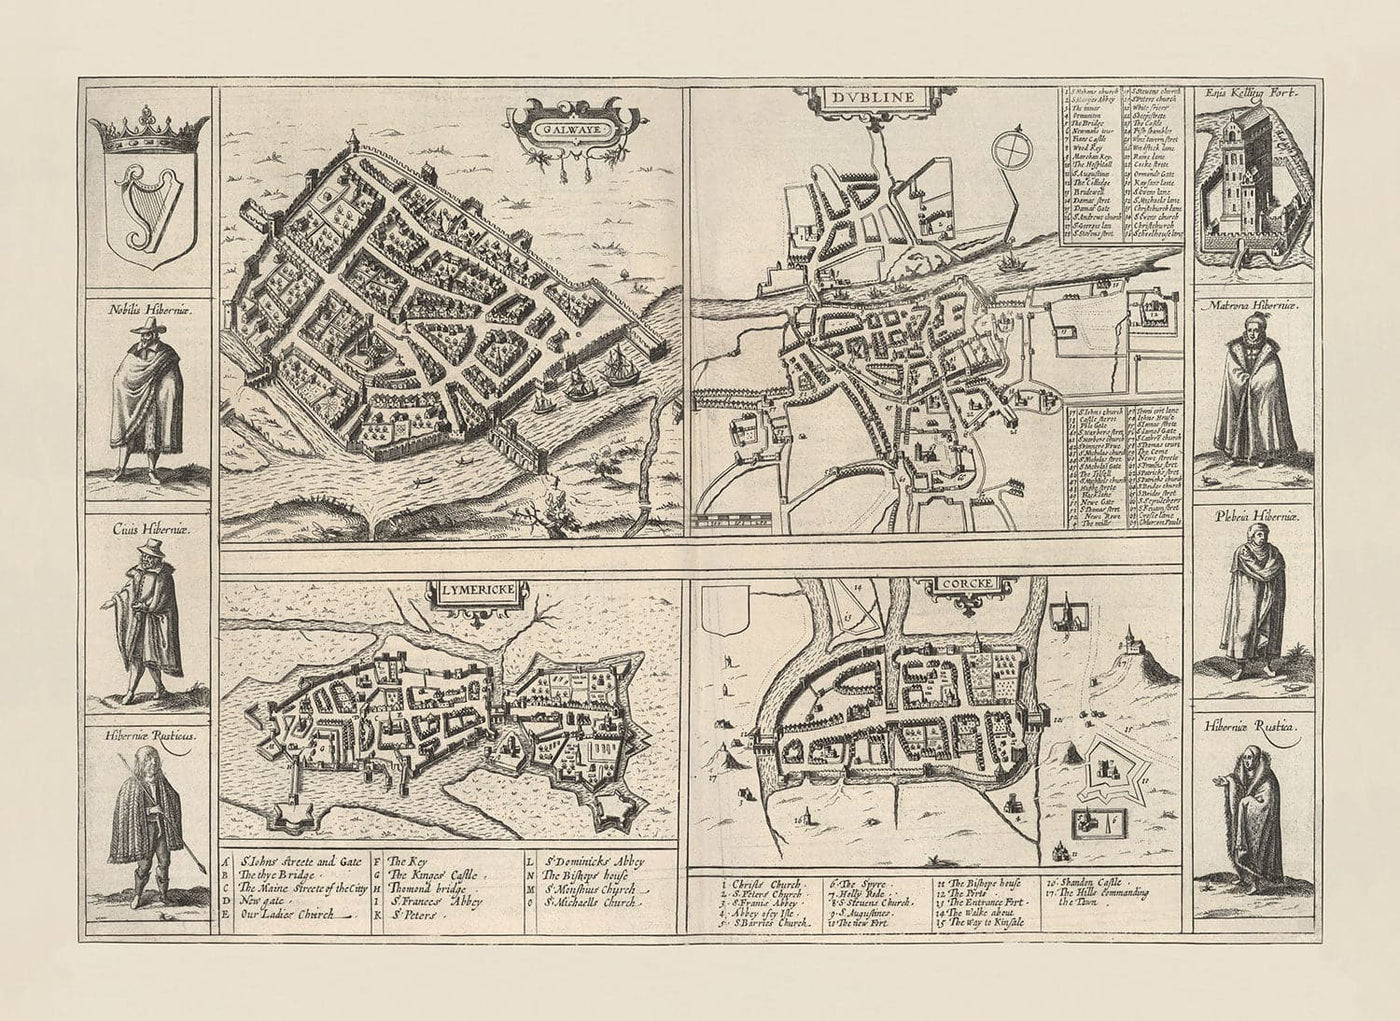 Old map of Dublin, Limerick, Cork and Galway in 1618 by Georg Braun - Ancient Eire City Charts